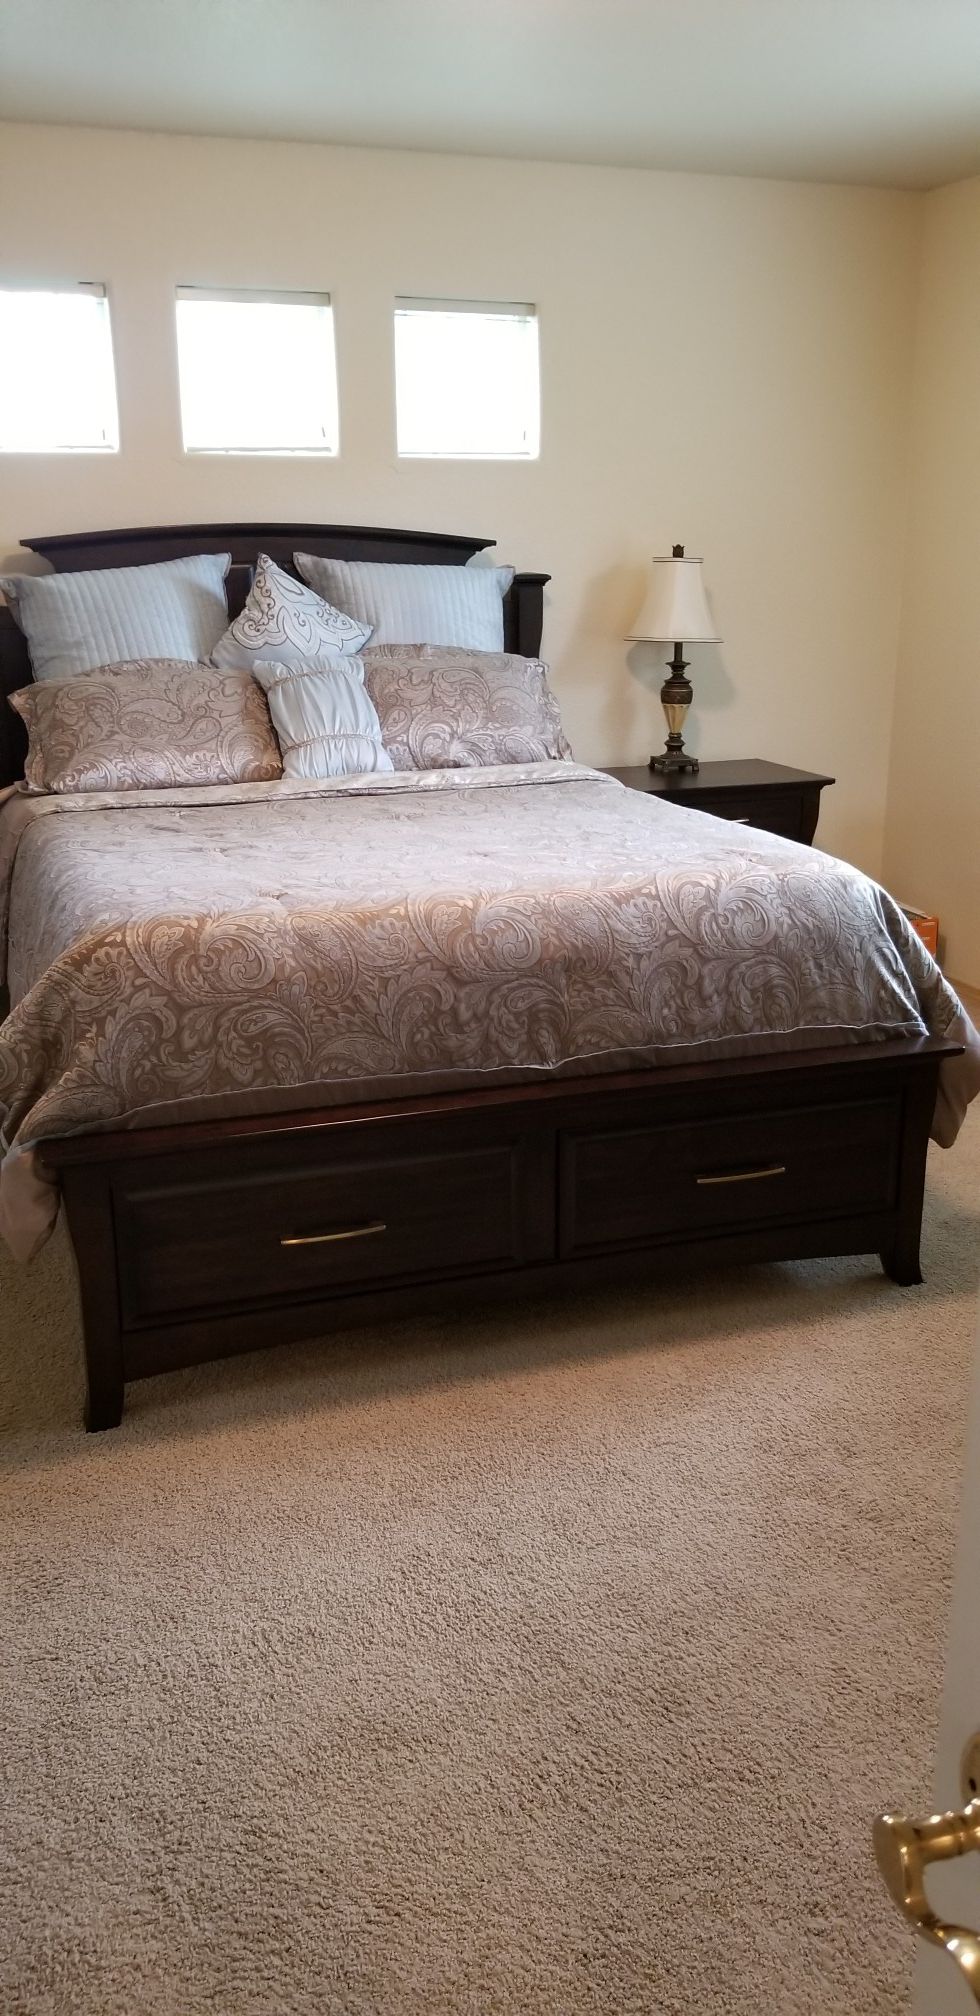 Beautiful queen bed frame, 2 night stands, and dresser w/ mirror